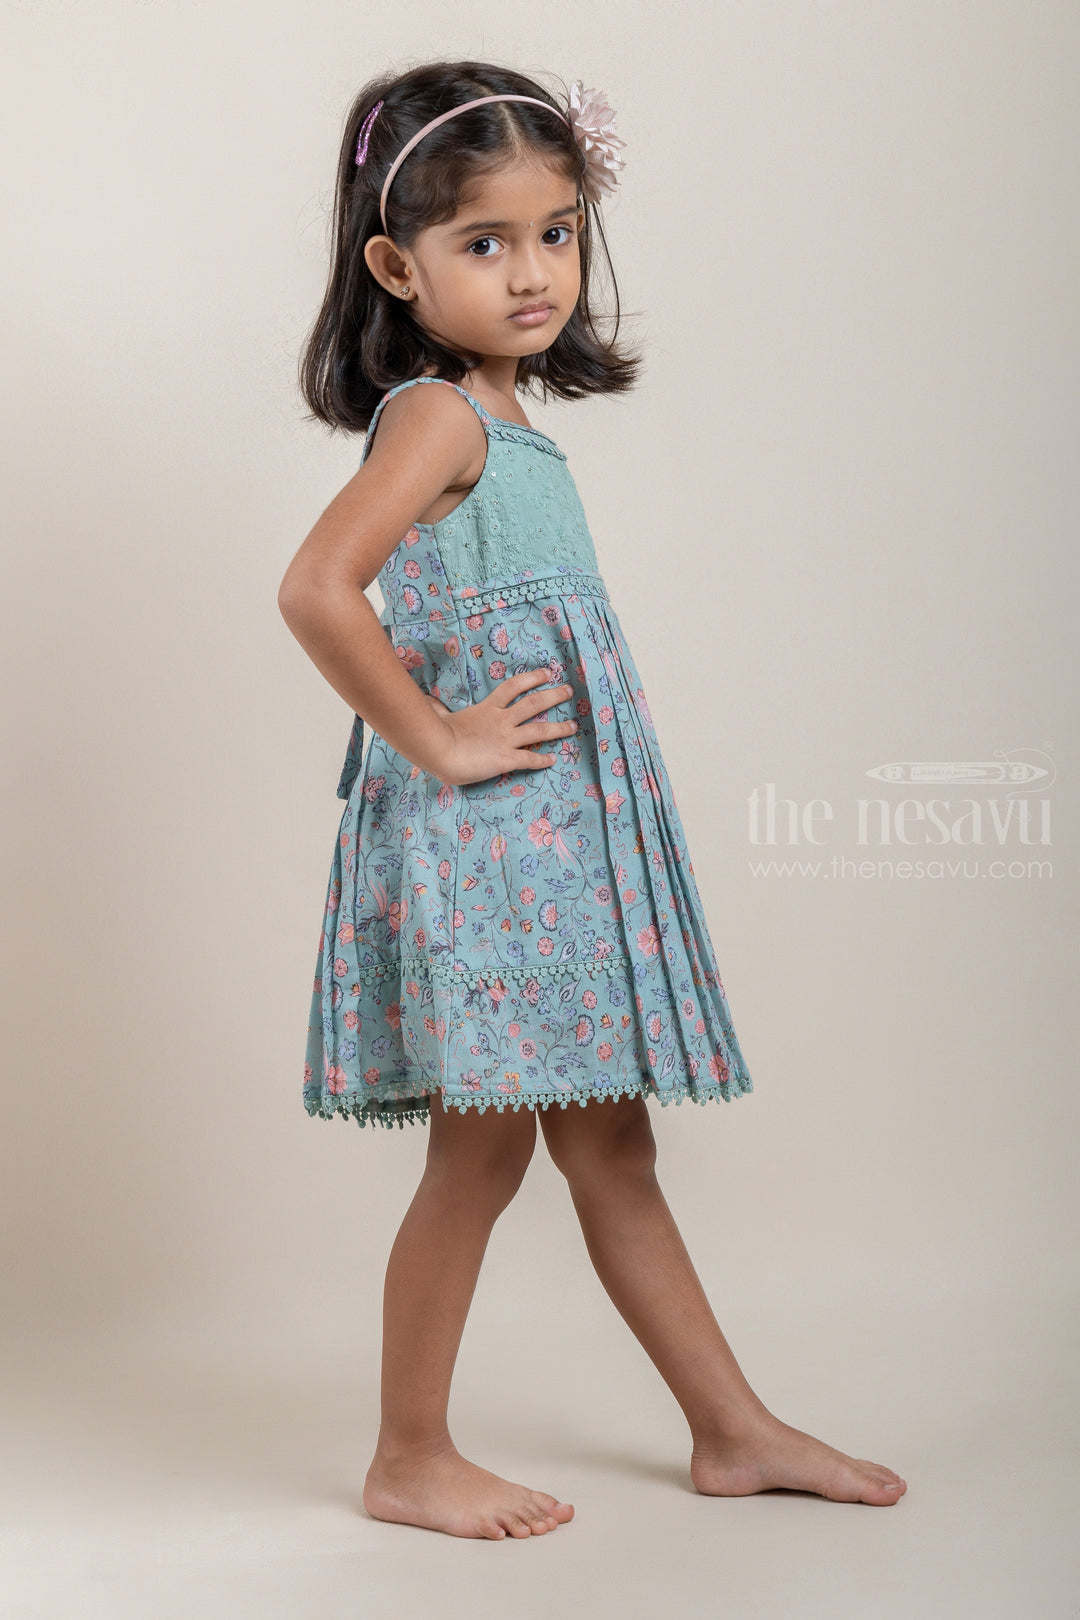 The Nesavu Baby Cotton Frocks Stunning Green Floral Printed Casual Soft Cotton Frock For Girls Nesavu Stylish Girls Cotton Frock Collection | Frock Gown For Girls | The Nesavu